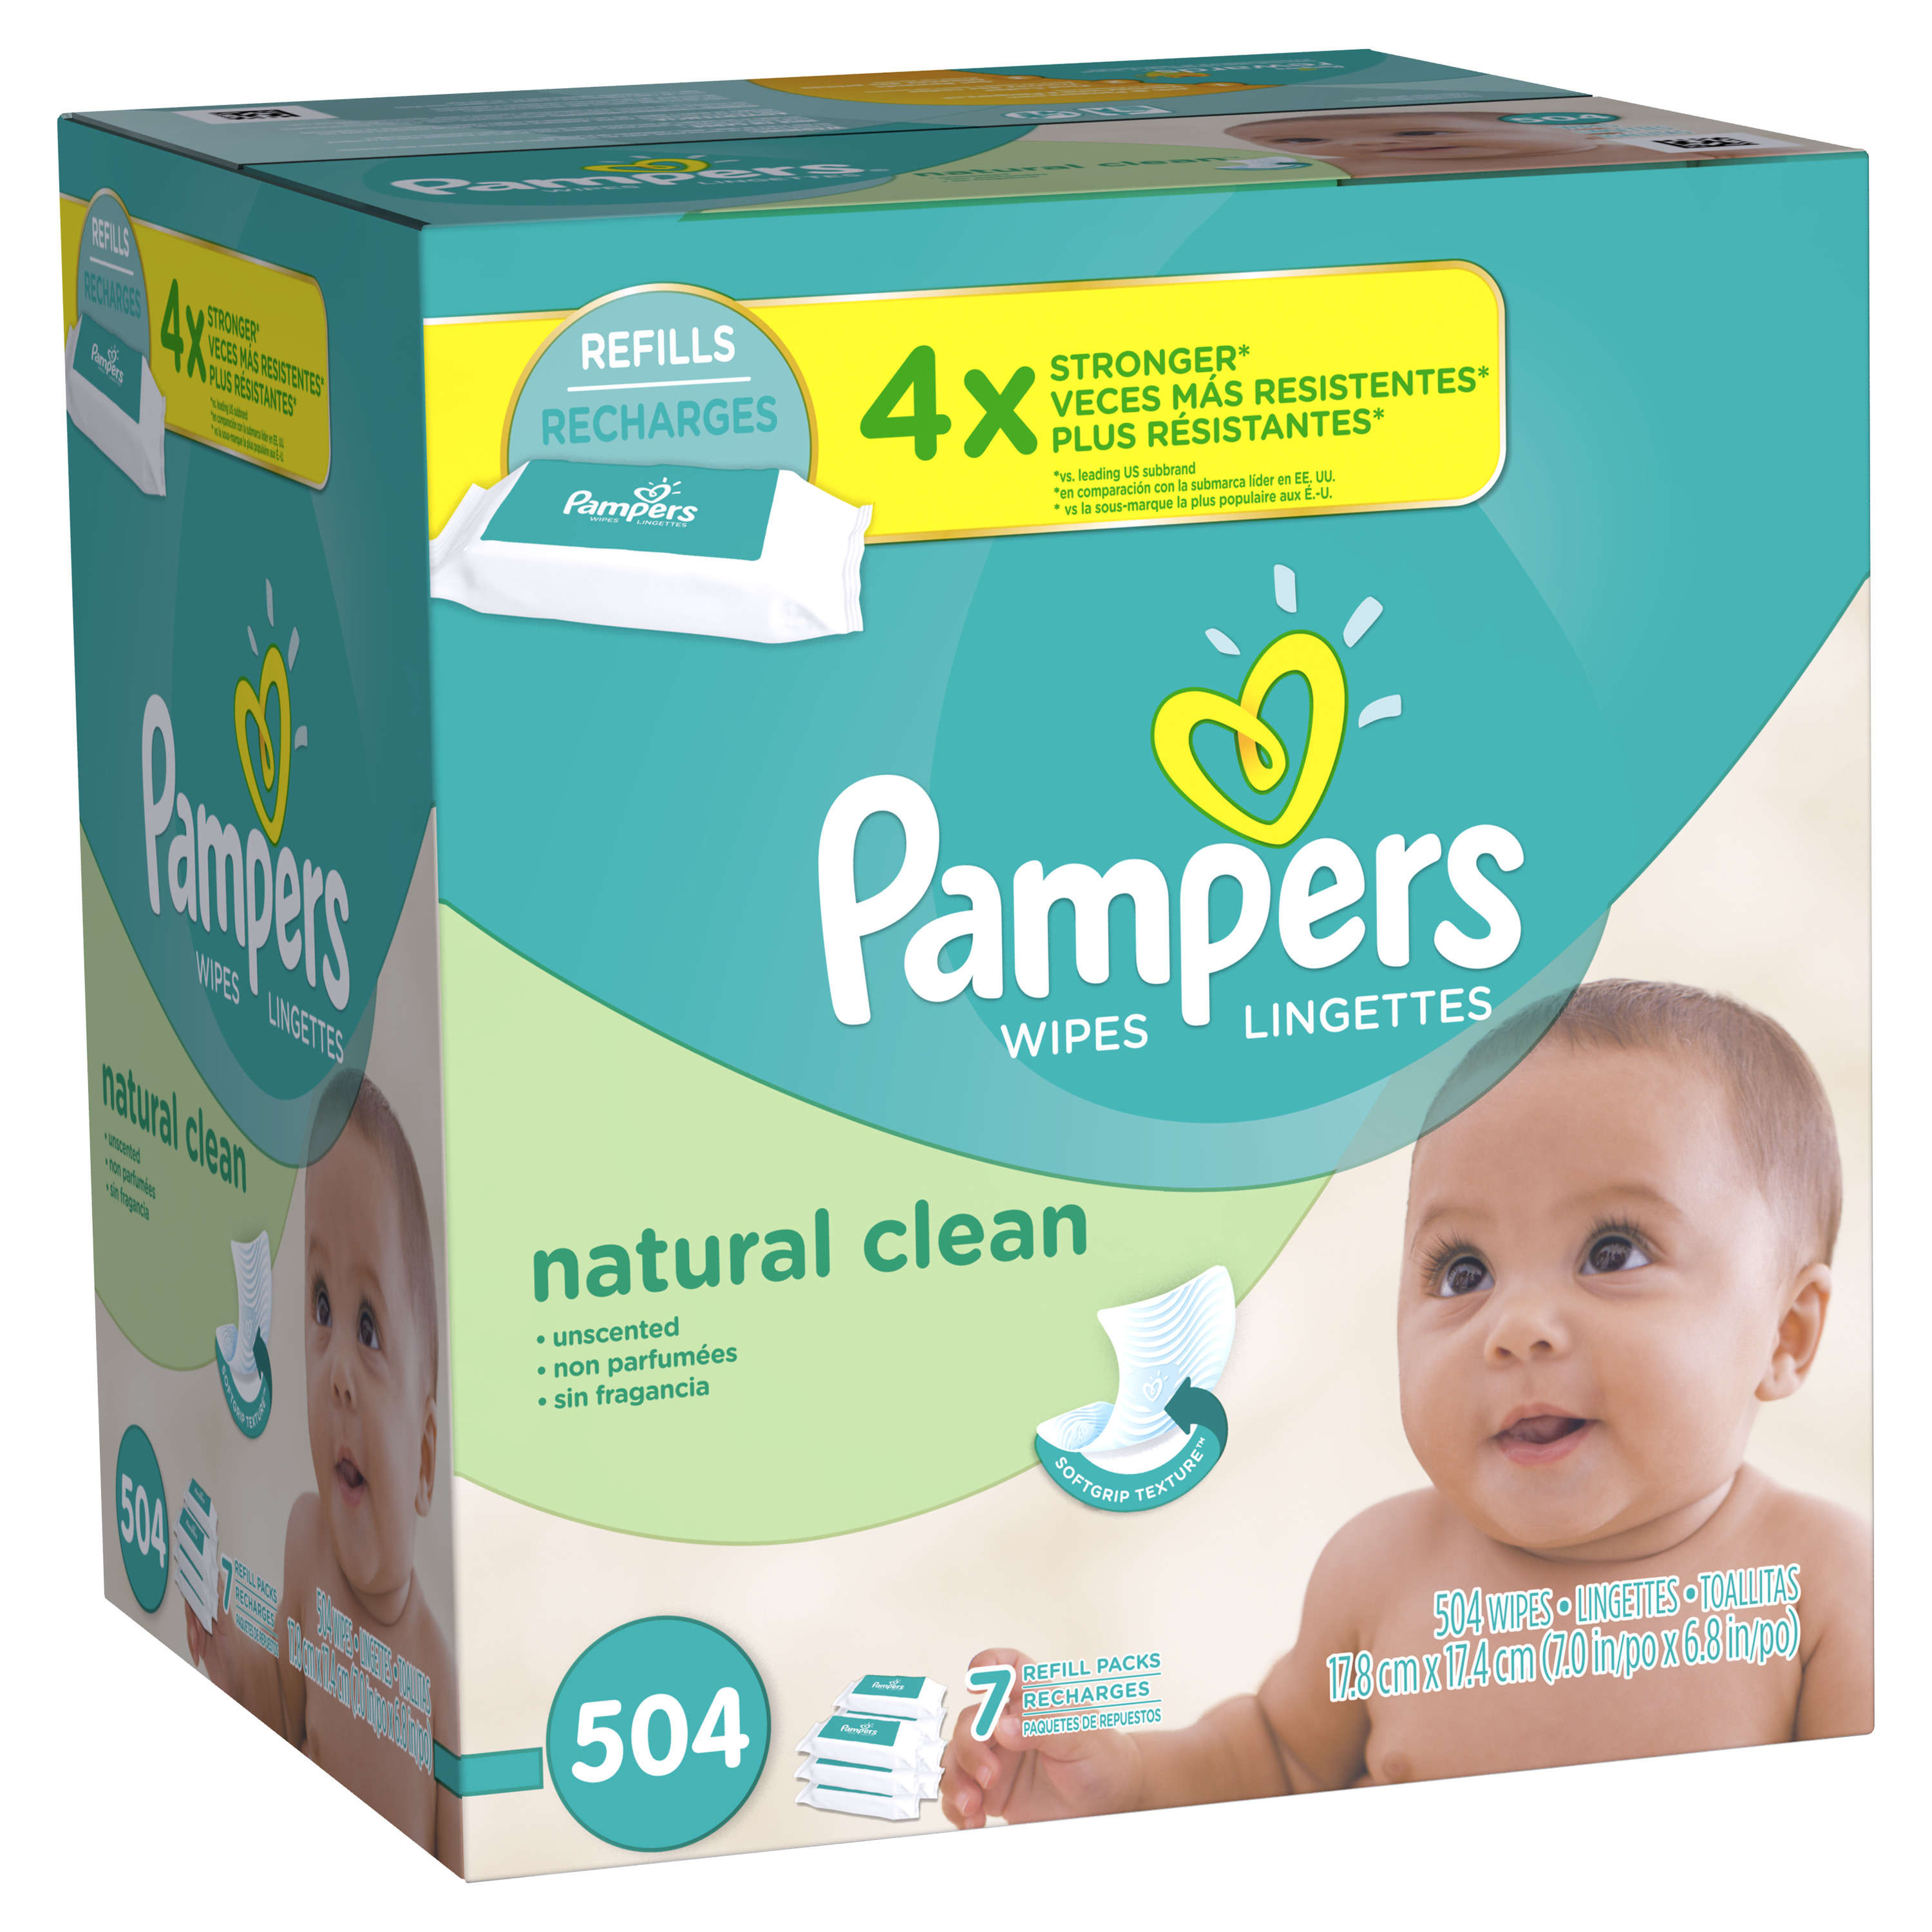 Pampers Baby Wipes Natural Clean 7 Refill Packs, 504 Total Wipes - image 1 of 7